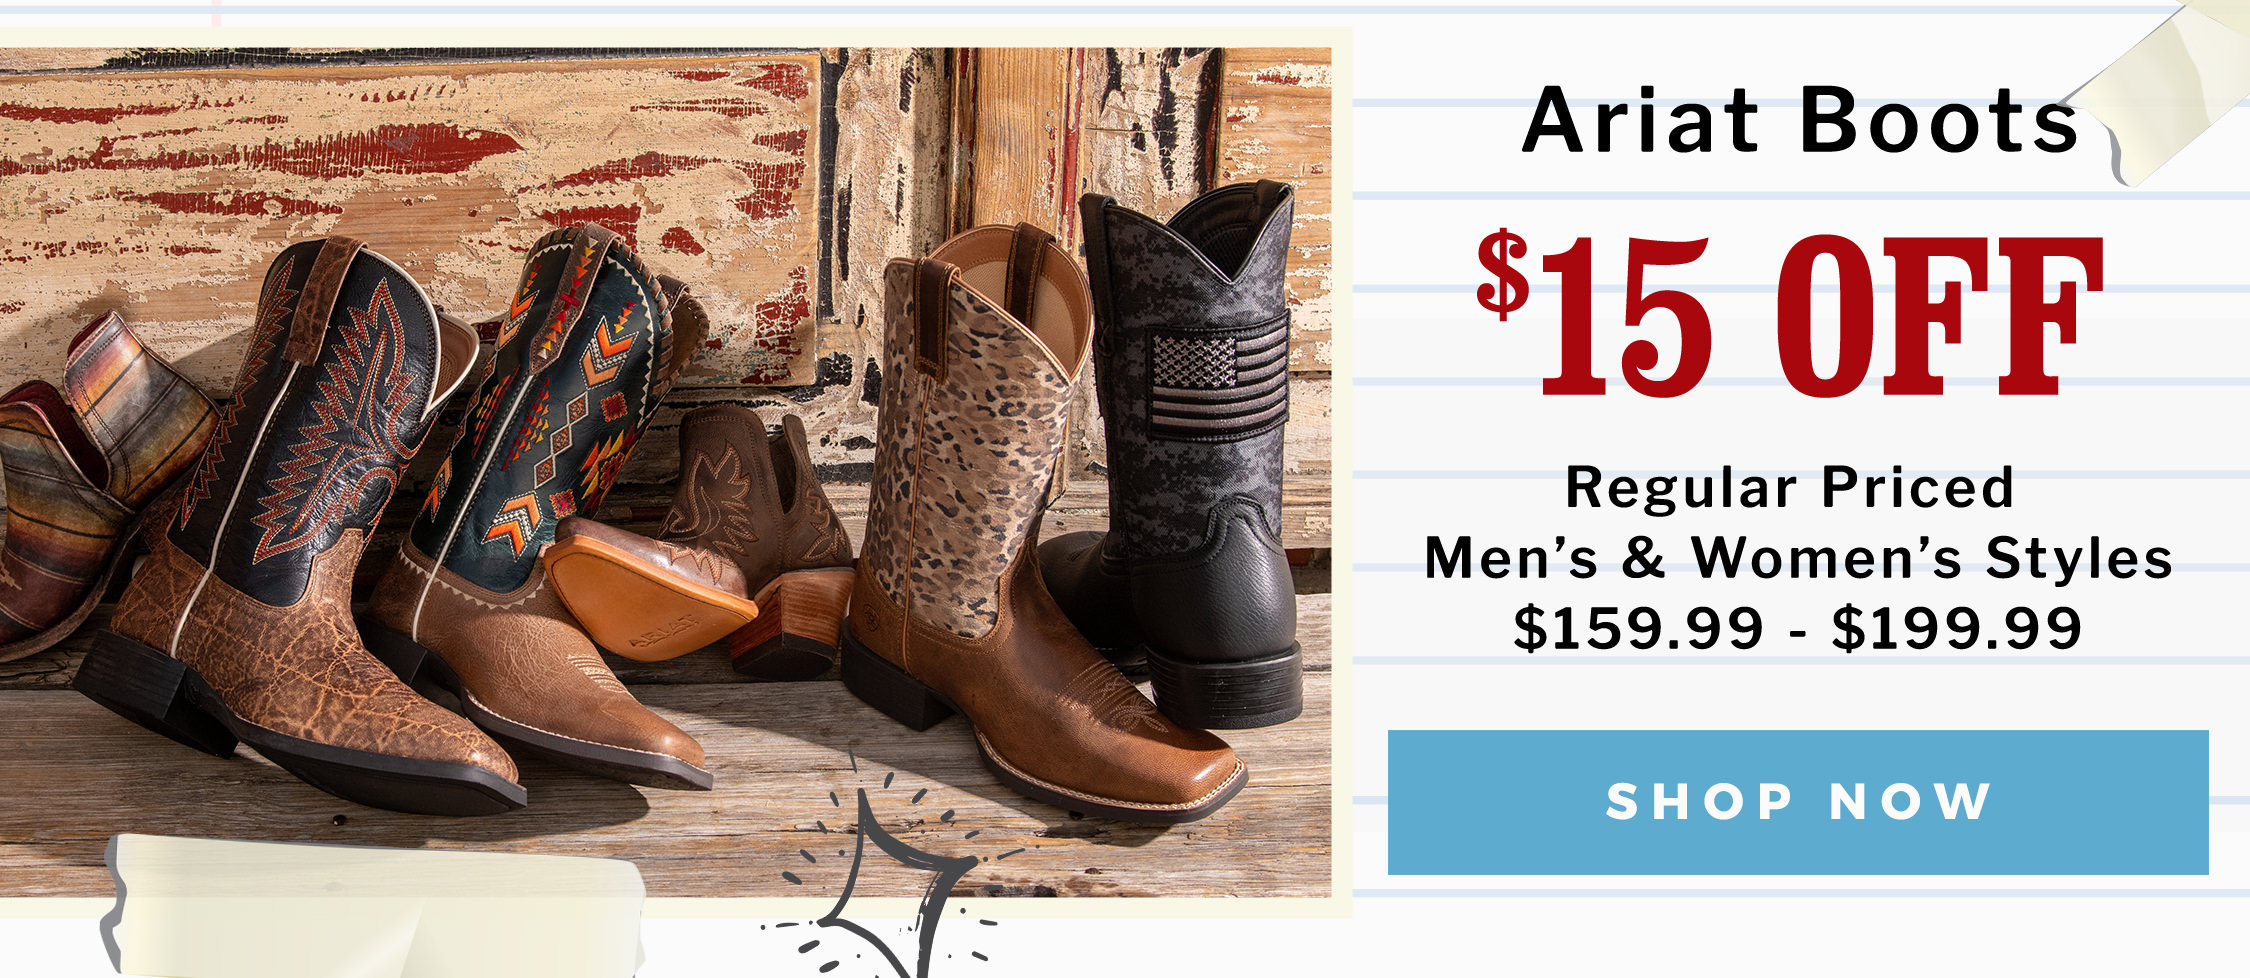 Cavender’s 2022 Back To School Sale - Boots & Shoes